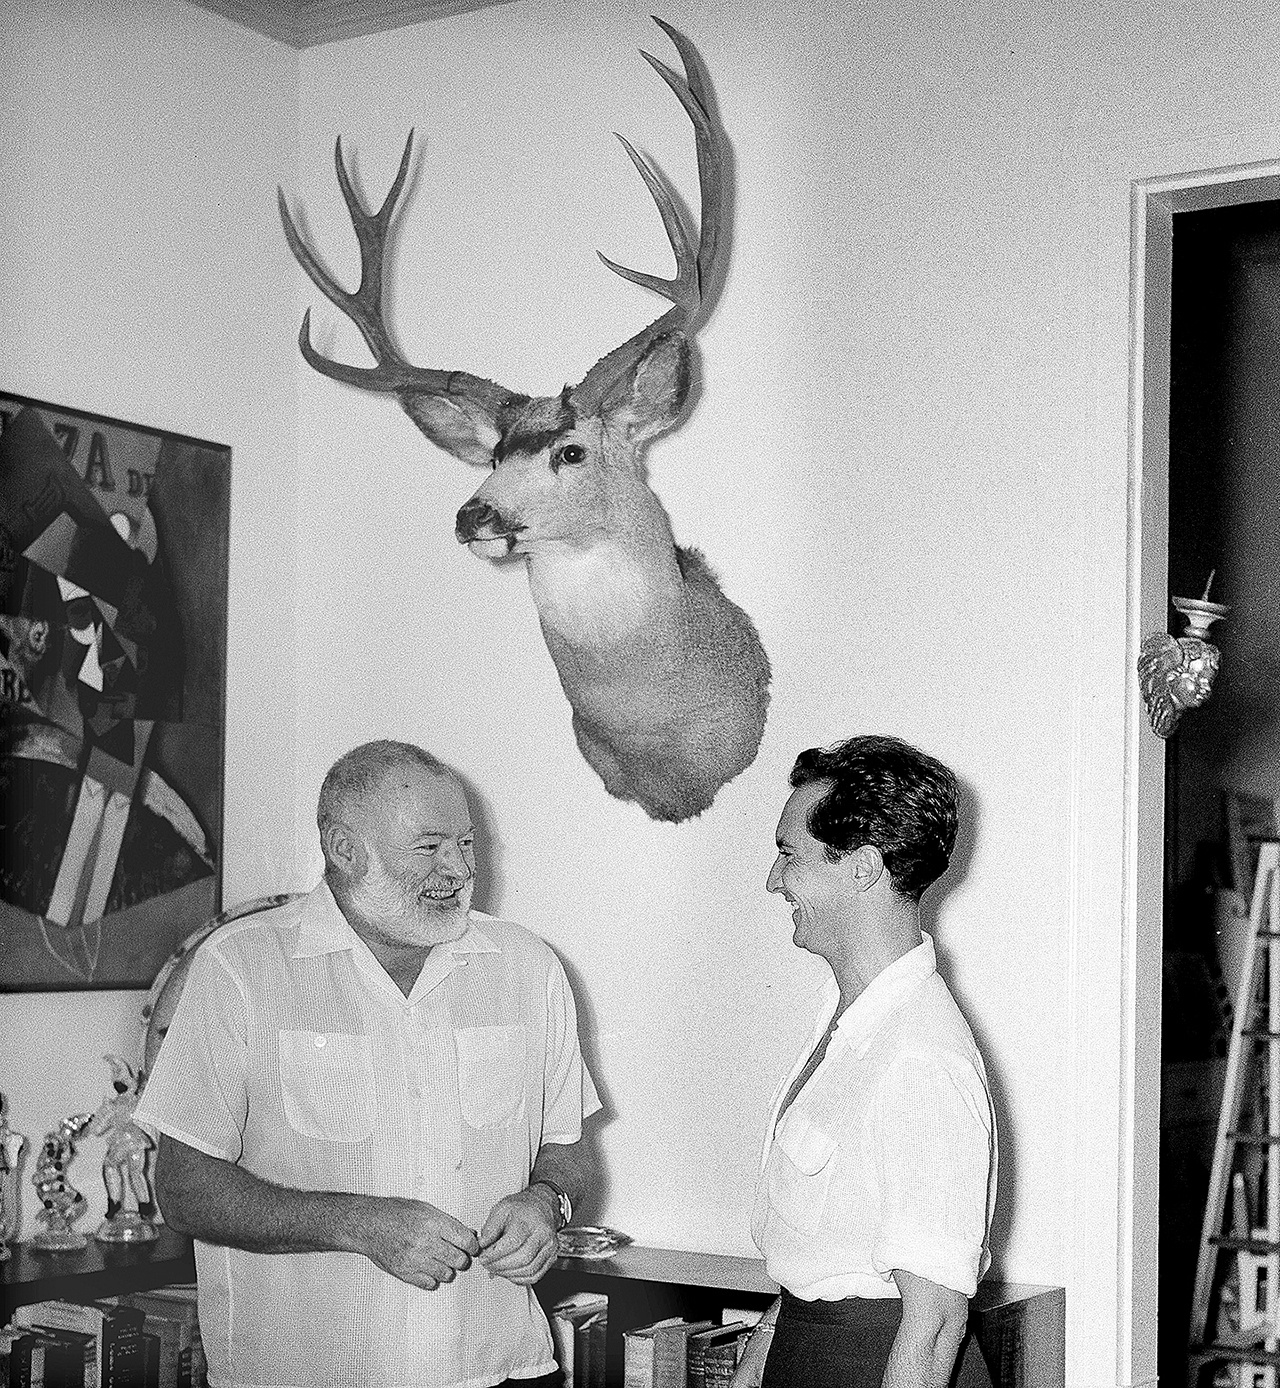 In this Sept. 2, 1954, photo, Luis Miguel Dominguin, right, retired Spanish bullfighter, visits with U.S. author Ernest Hemingway at Hemingway’s home in San Francisco de Paula, Cuba. (AP Photo/File)